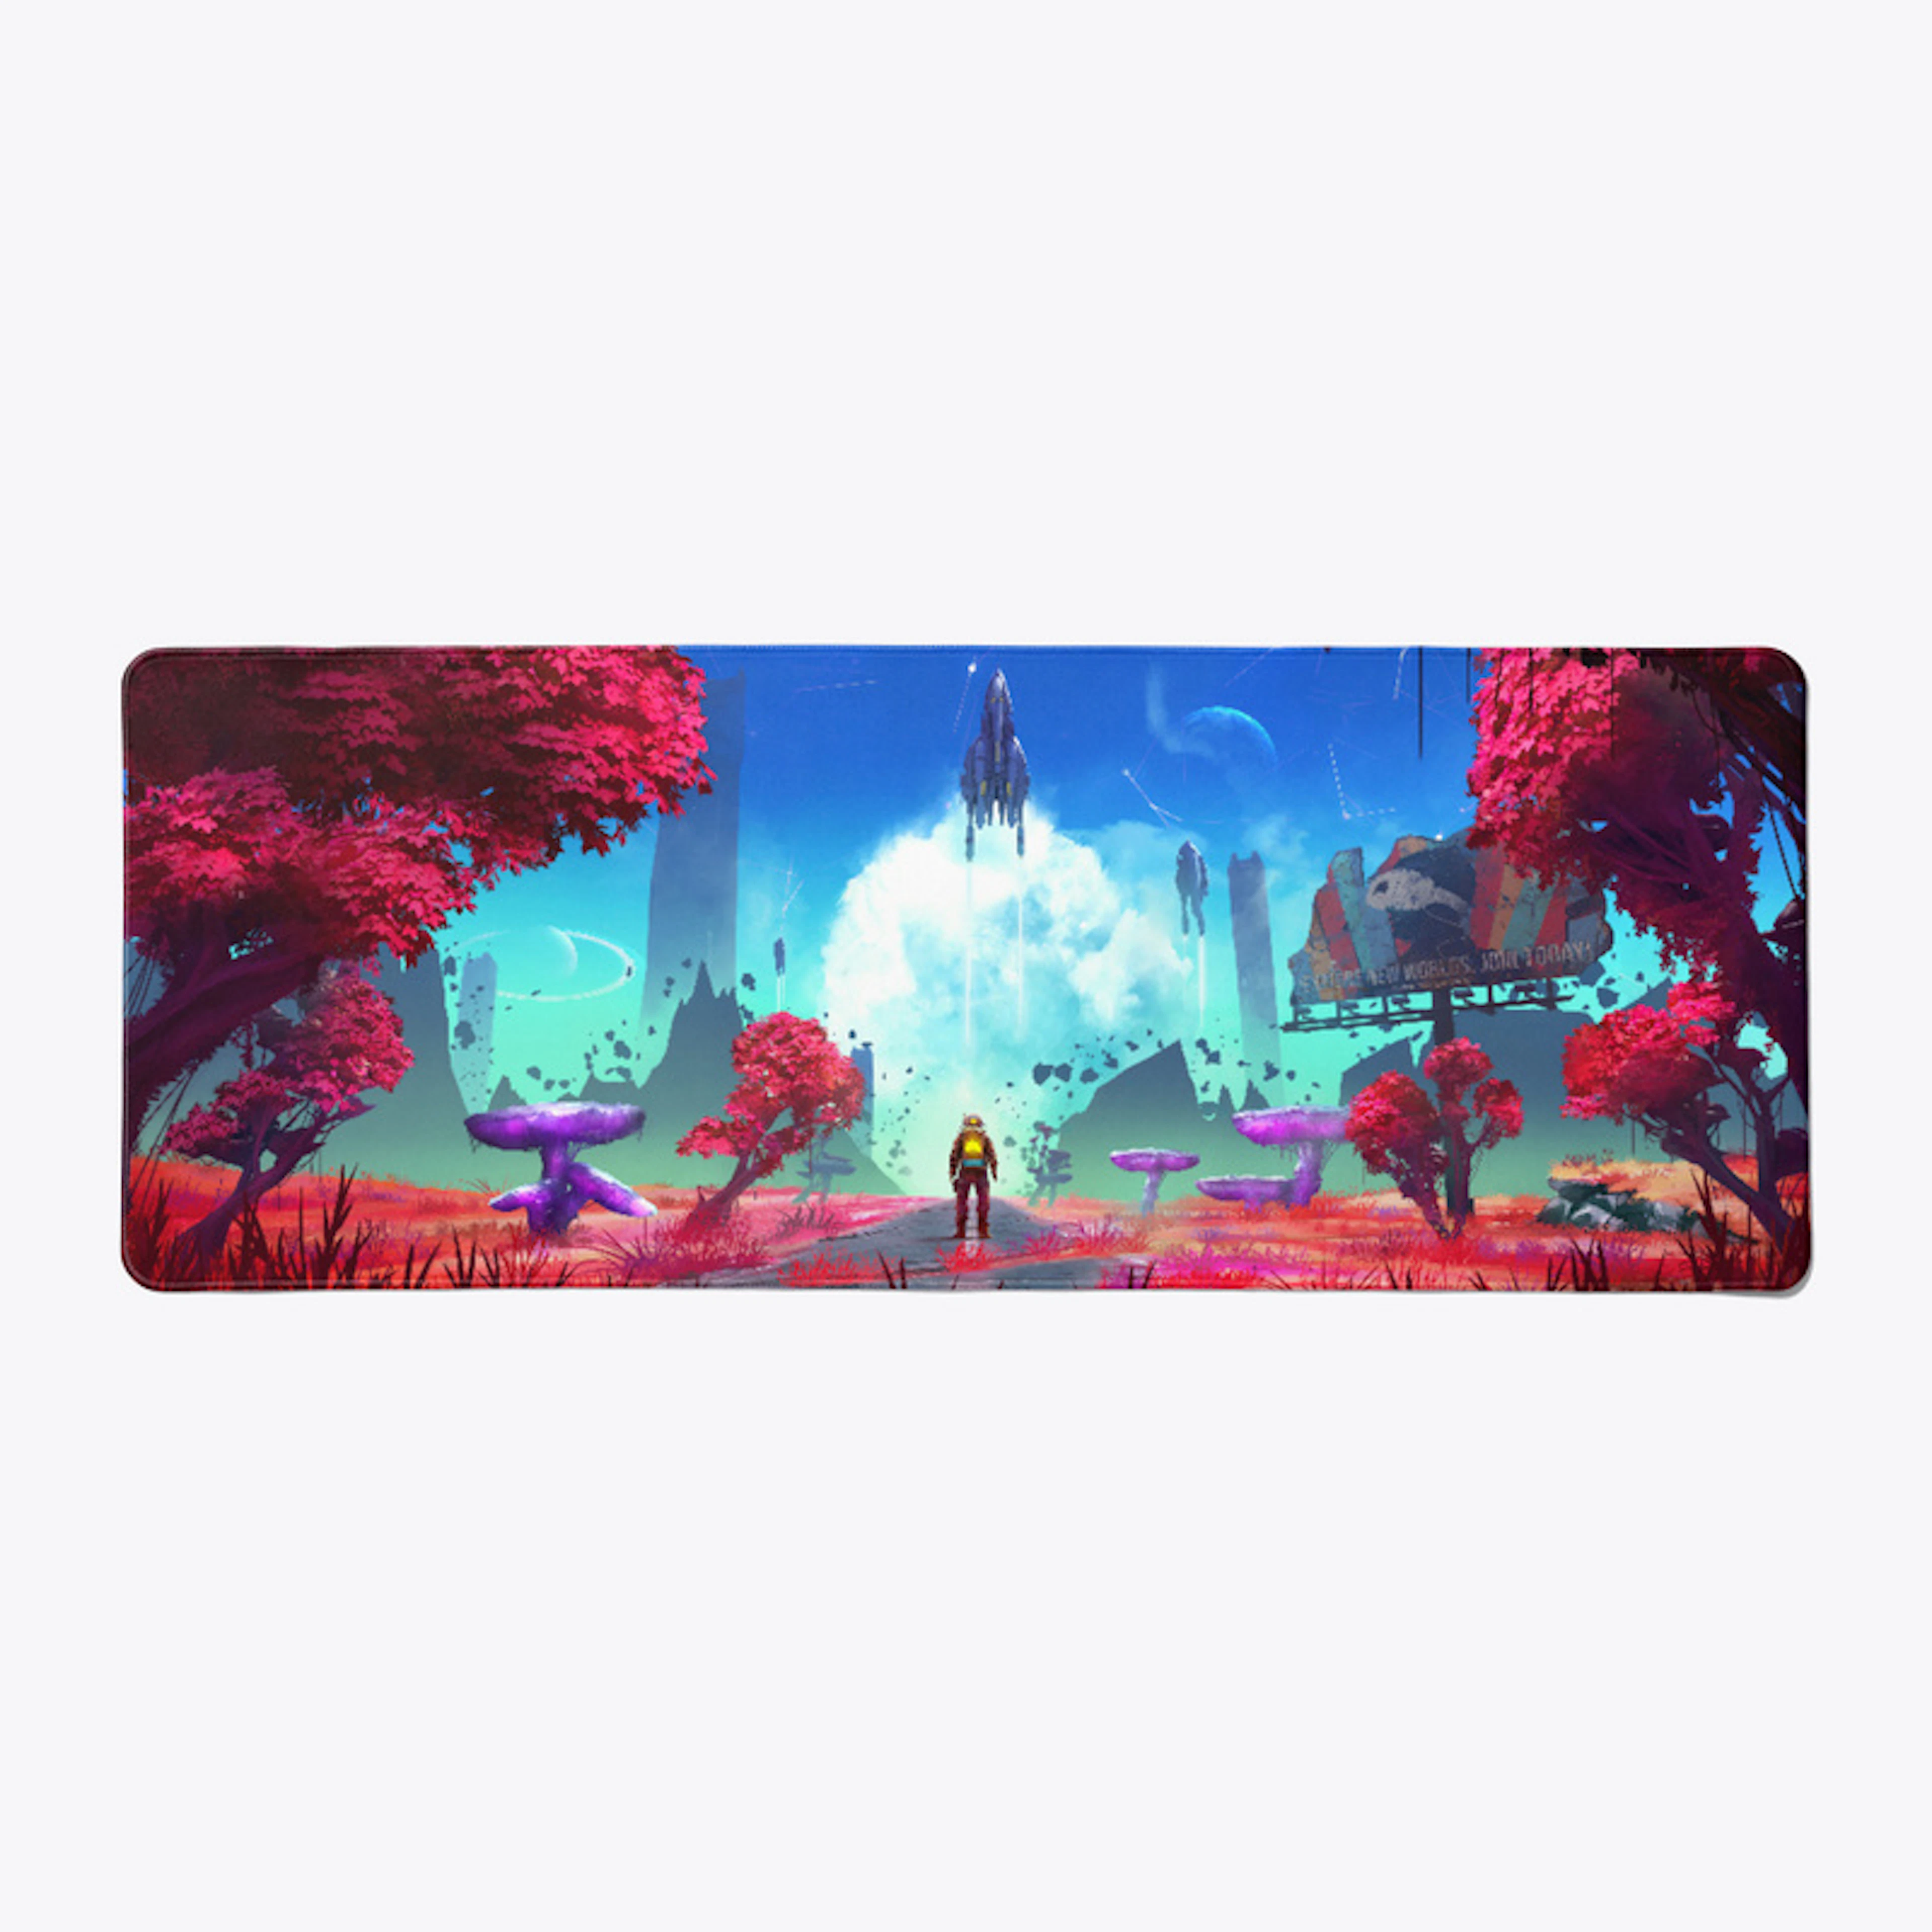 Player One Space - Mouse Pad